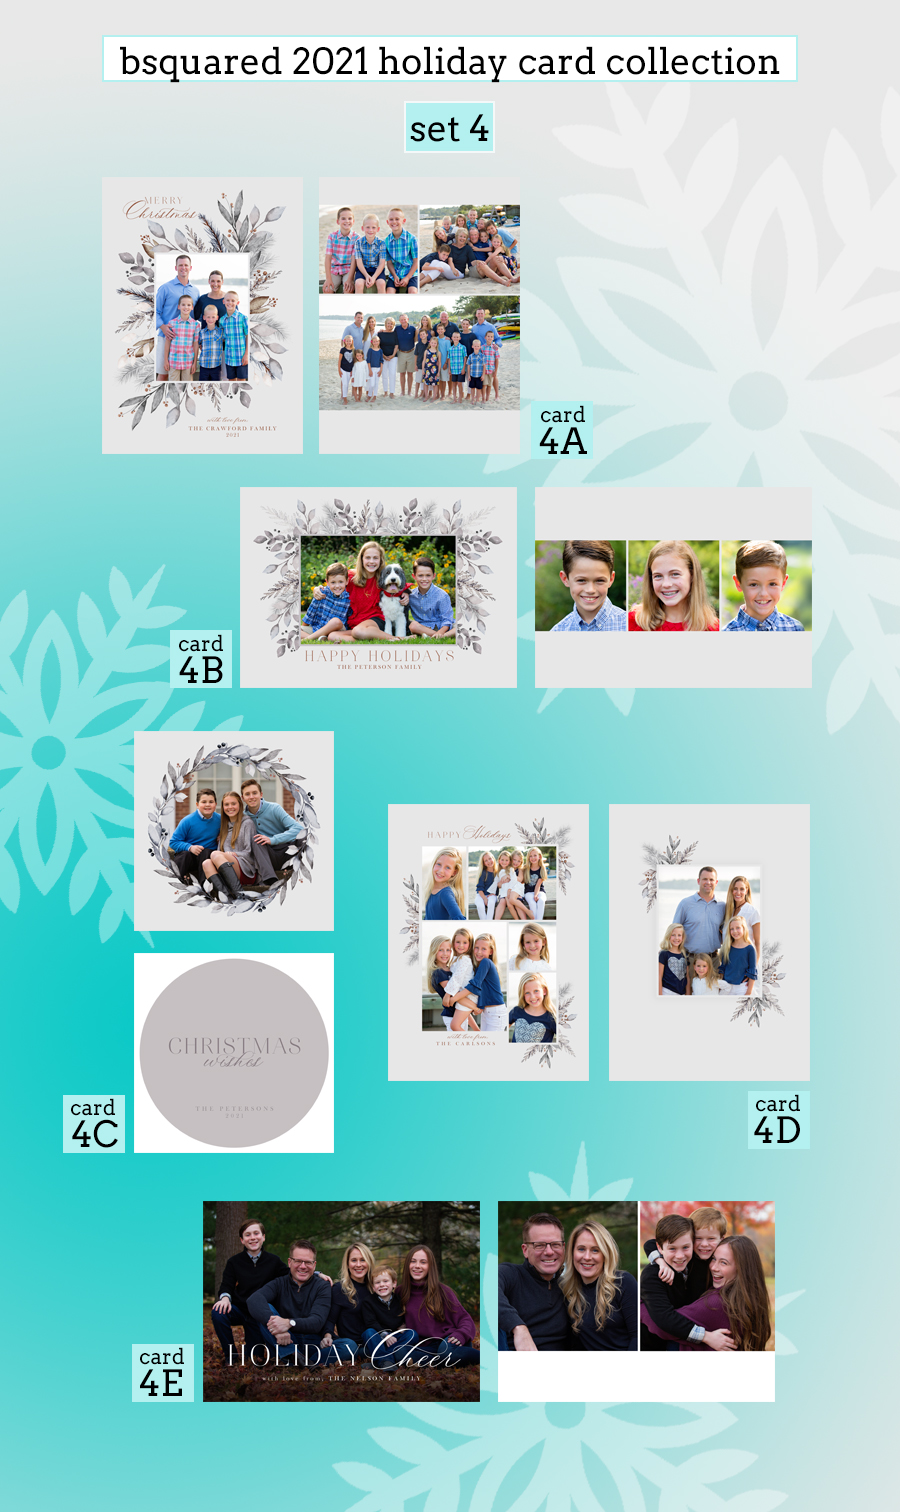 bsquared 2021 holiday cards 4